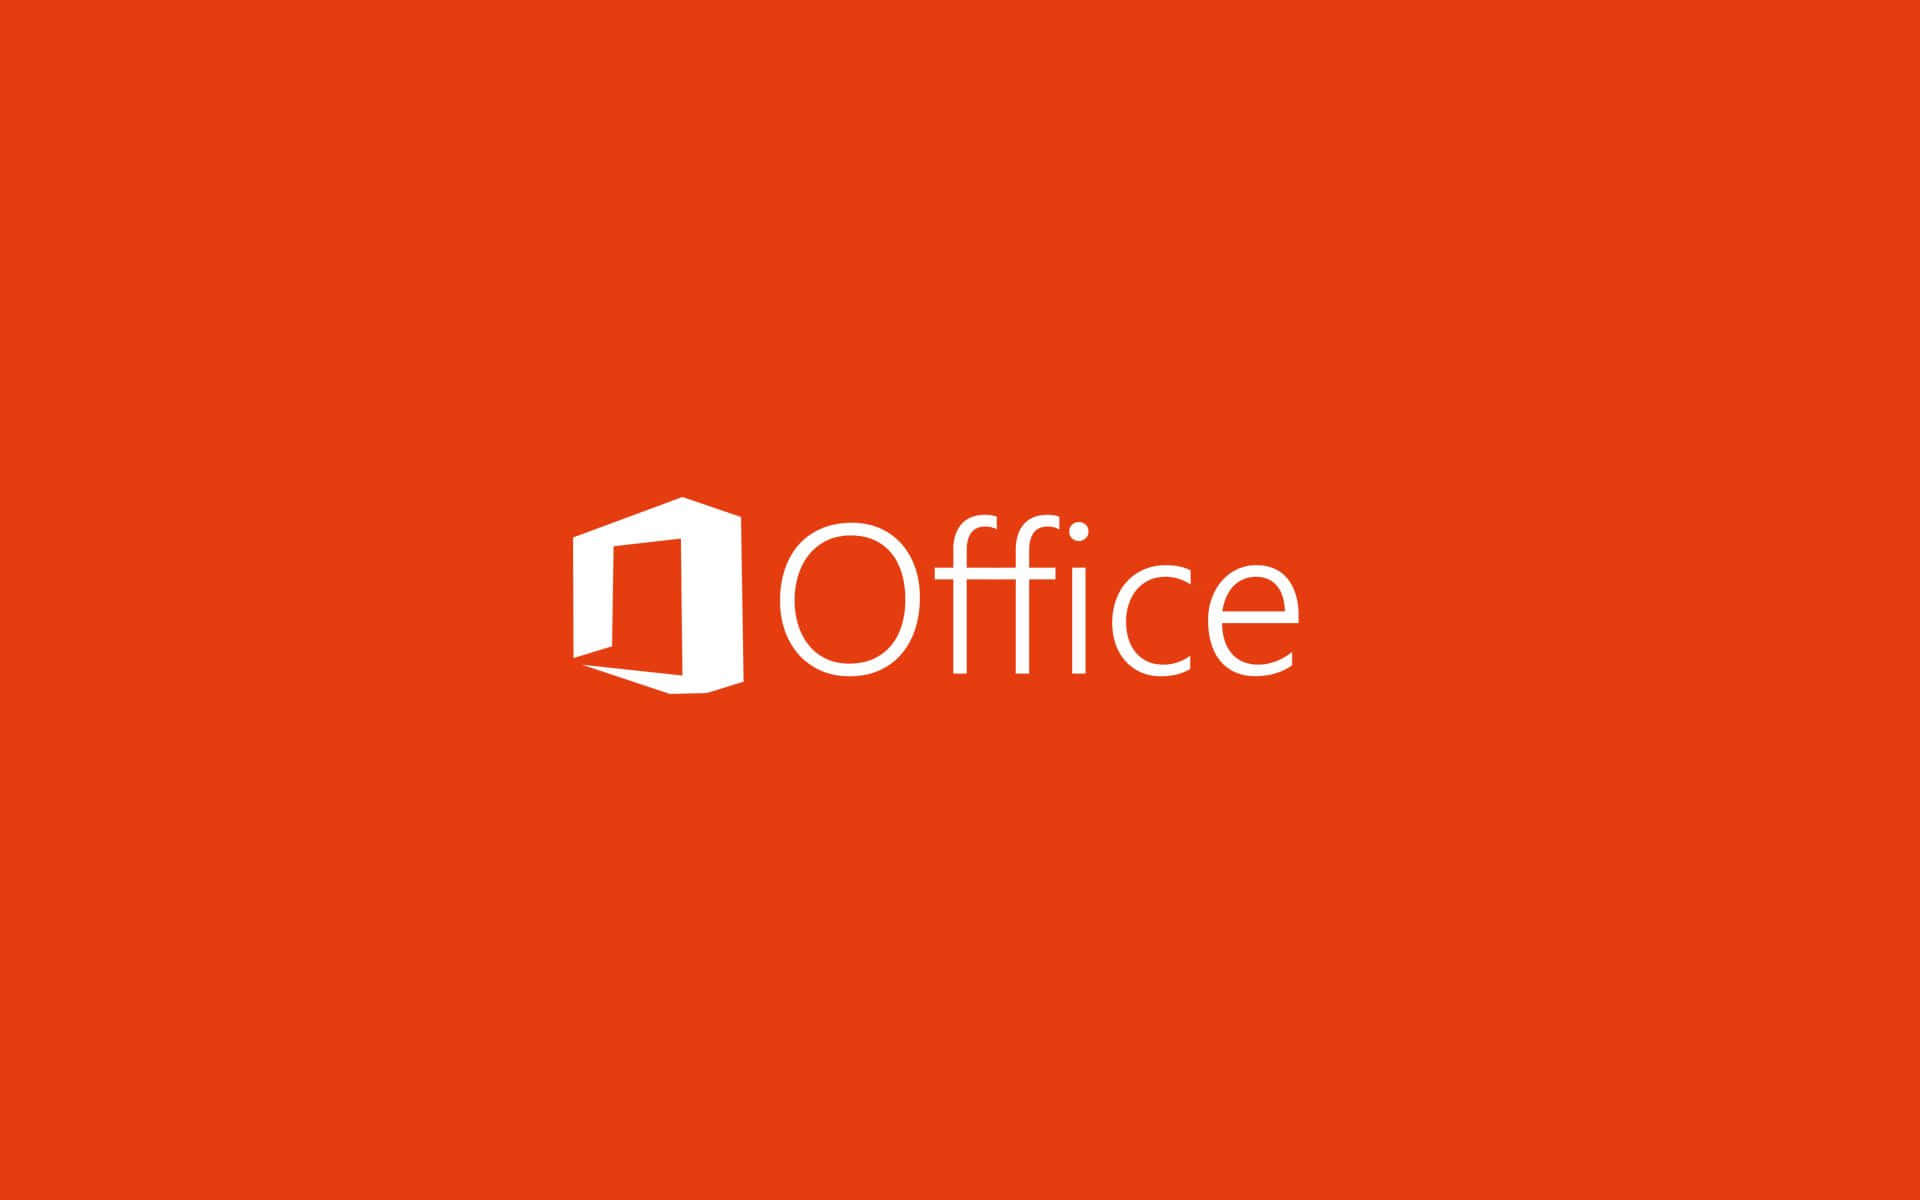 "Unlock the possibilities of Office 365"